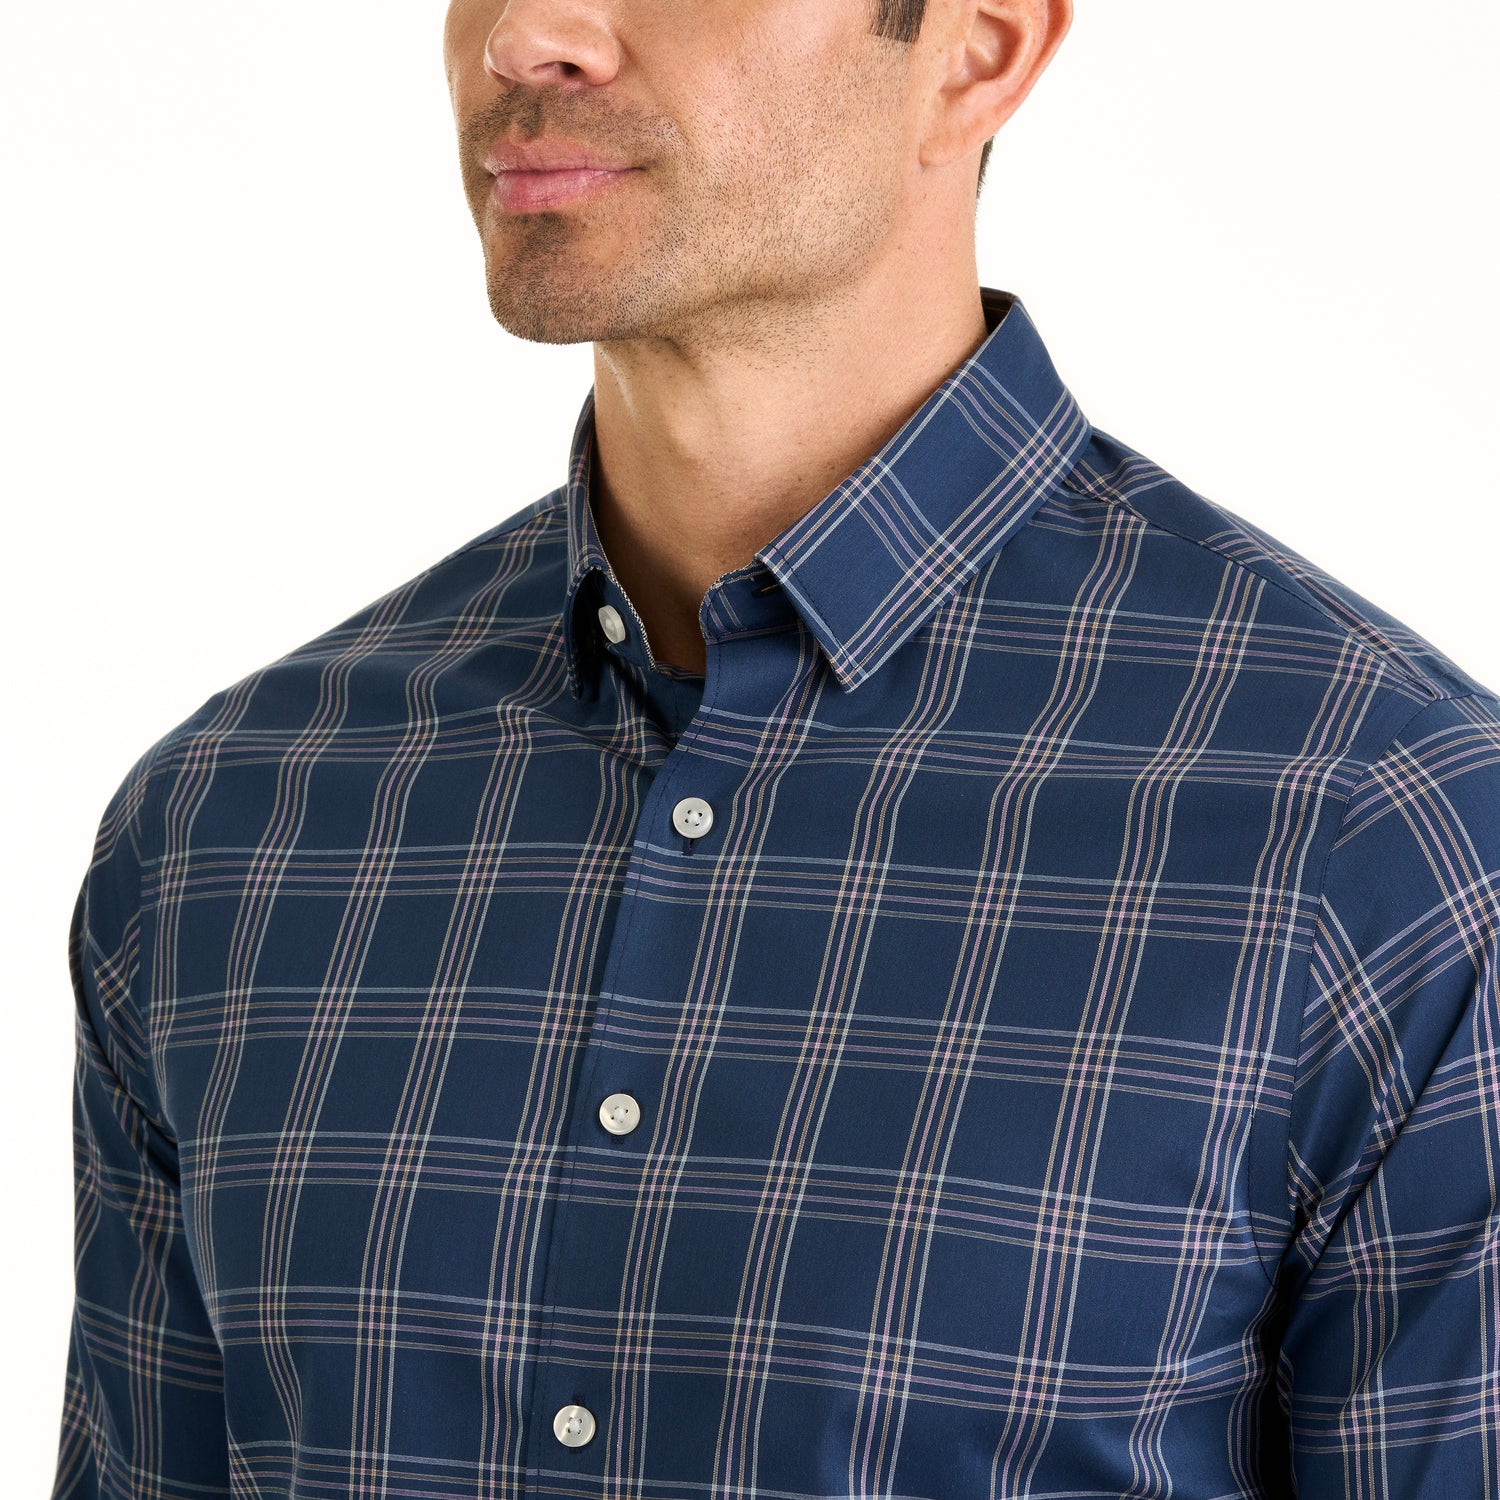 Essential Stain Shield Long Sleeve Shirt Wovens Open Grid  Print - Slim Fit